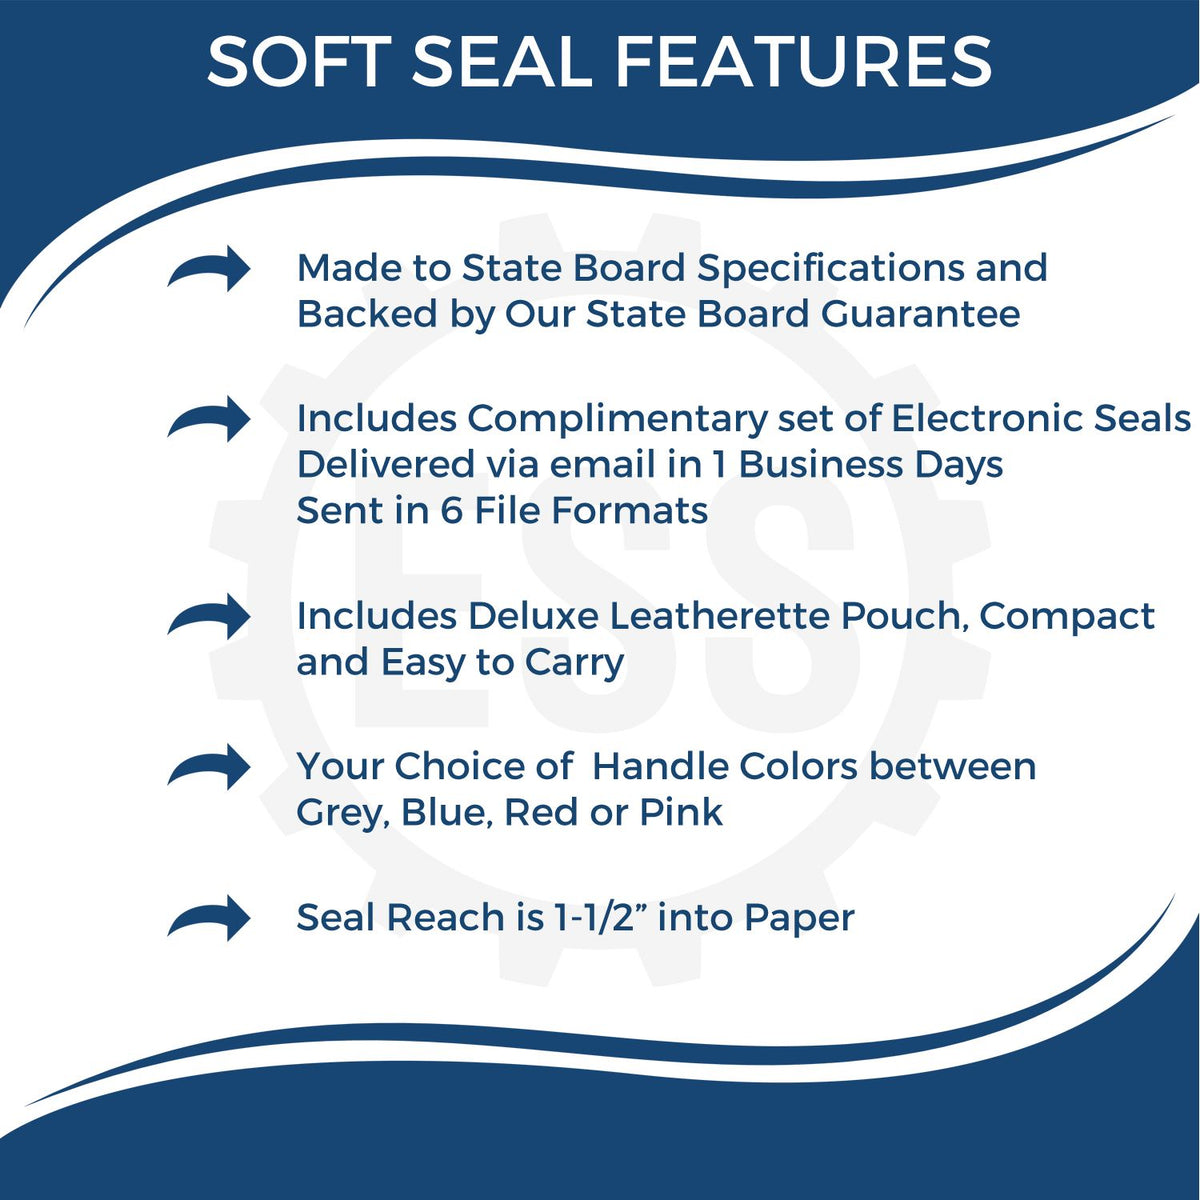 A picture of an infographic highlighting the selling points for the Soft Maine Professional Geologist Seal